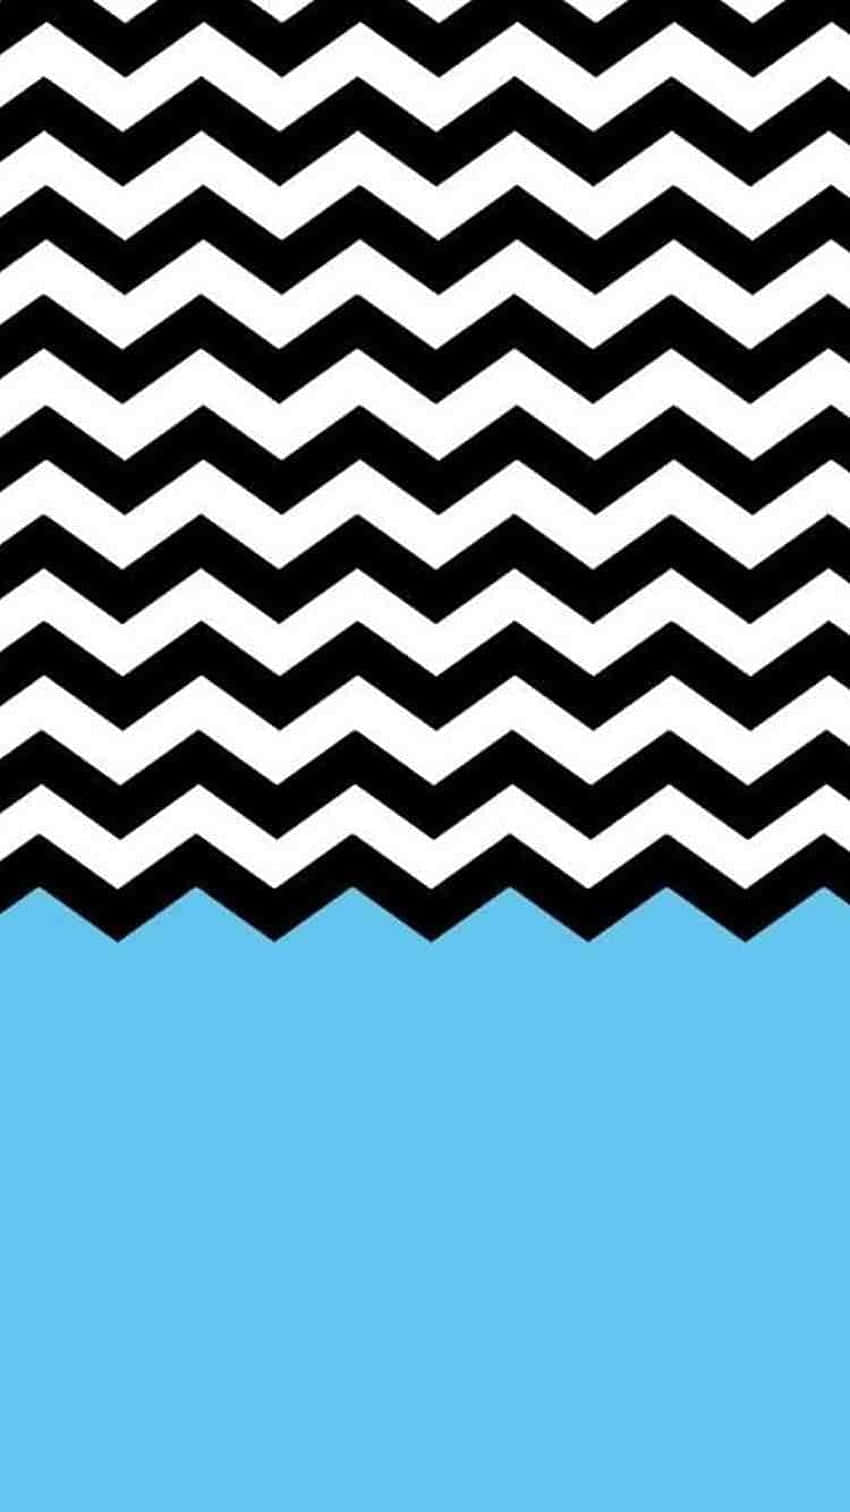 Unlock a Stylish Look with a Chevron Iphone Wallpaper